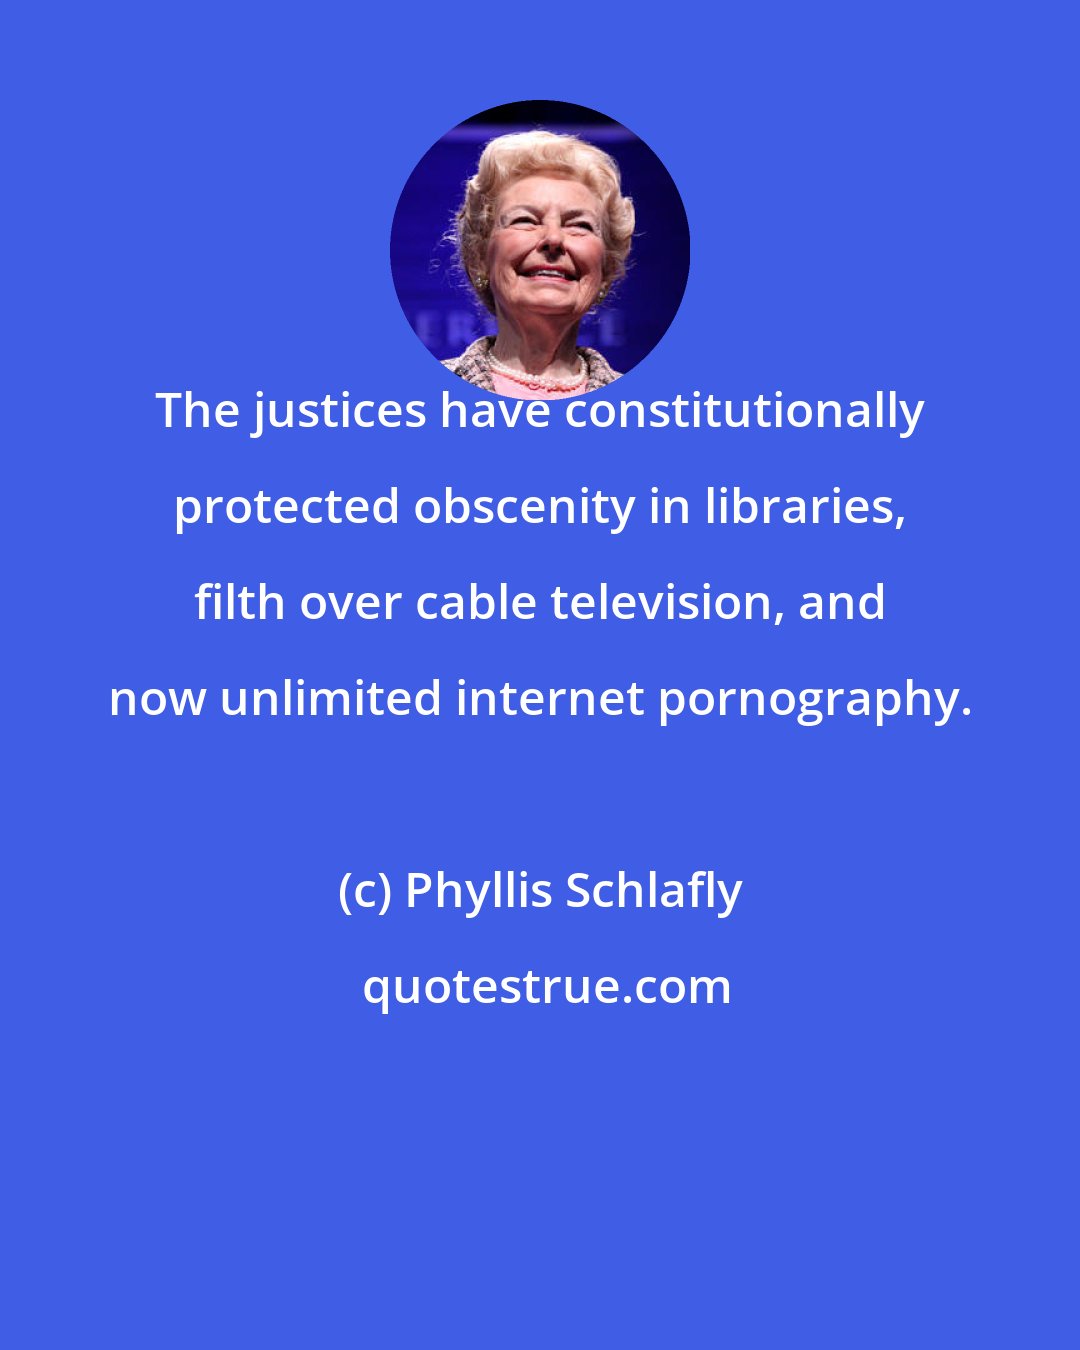 Phyllis Schlafly: The justices have constitutionally protected obscenity in libraries, filth over cable television, and now unlimited internet pornography.